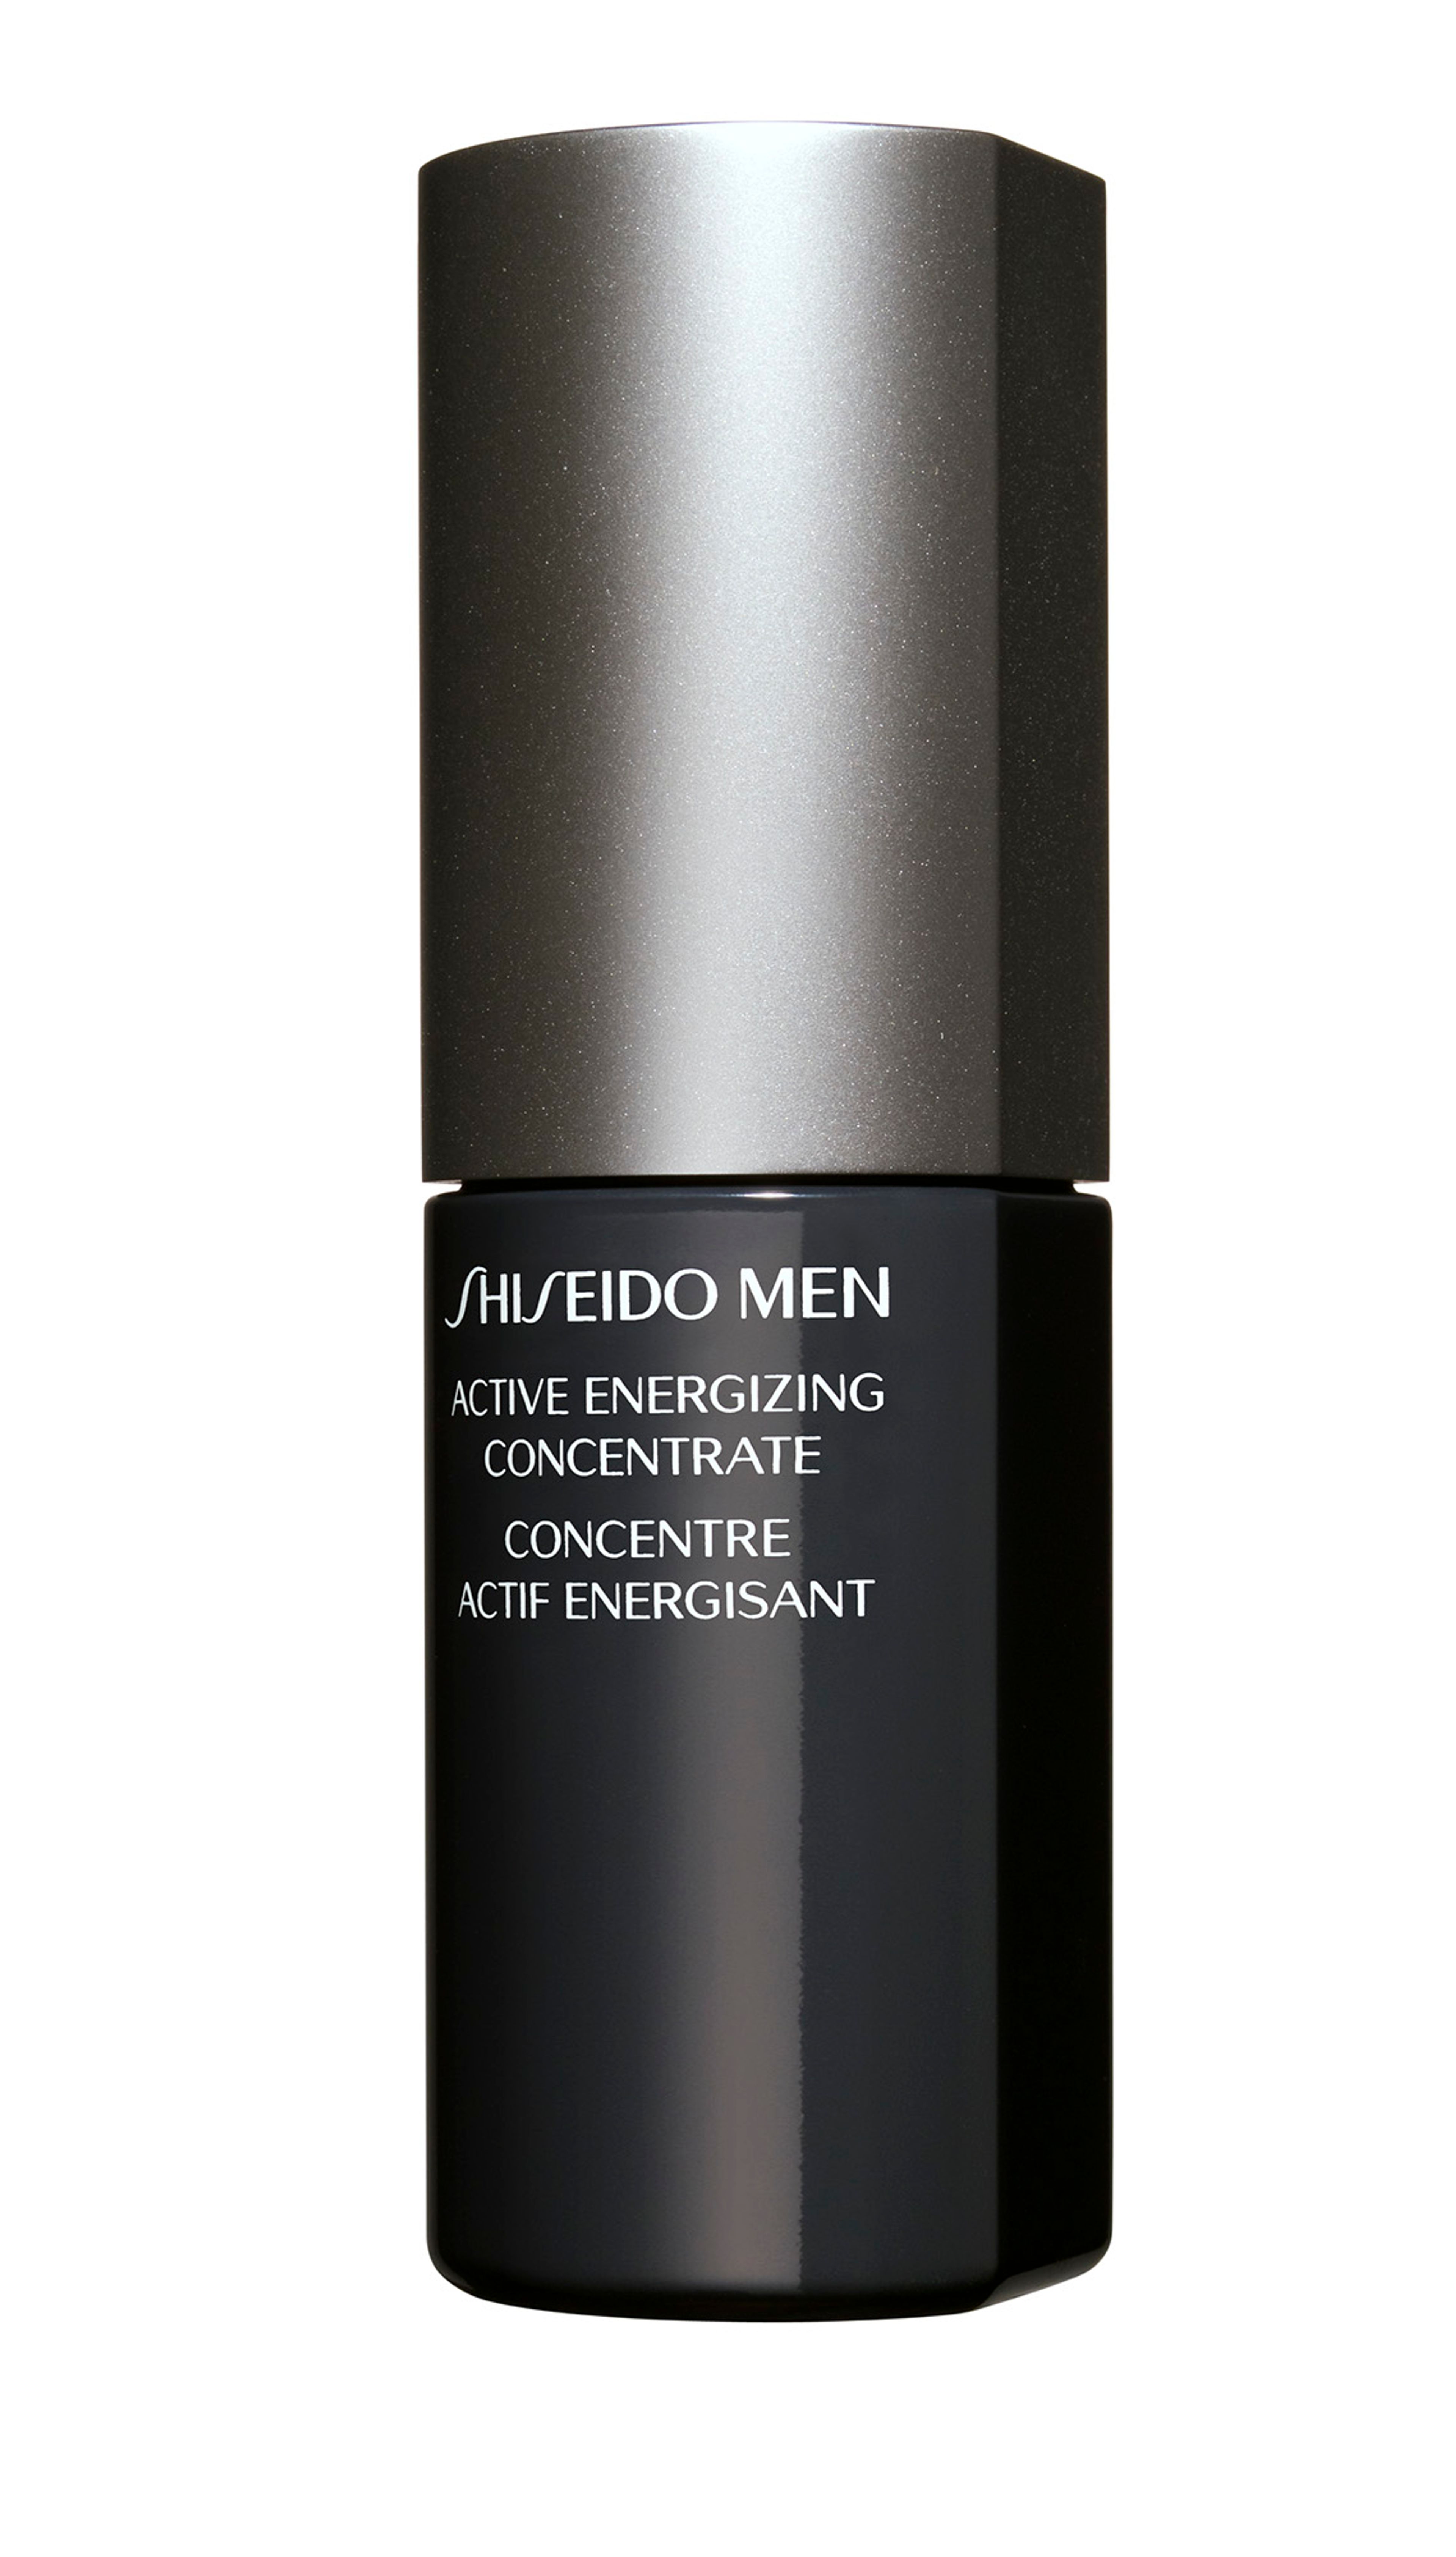 Shiseido Active Energizing Concentrate 1